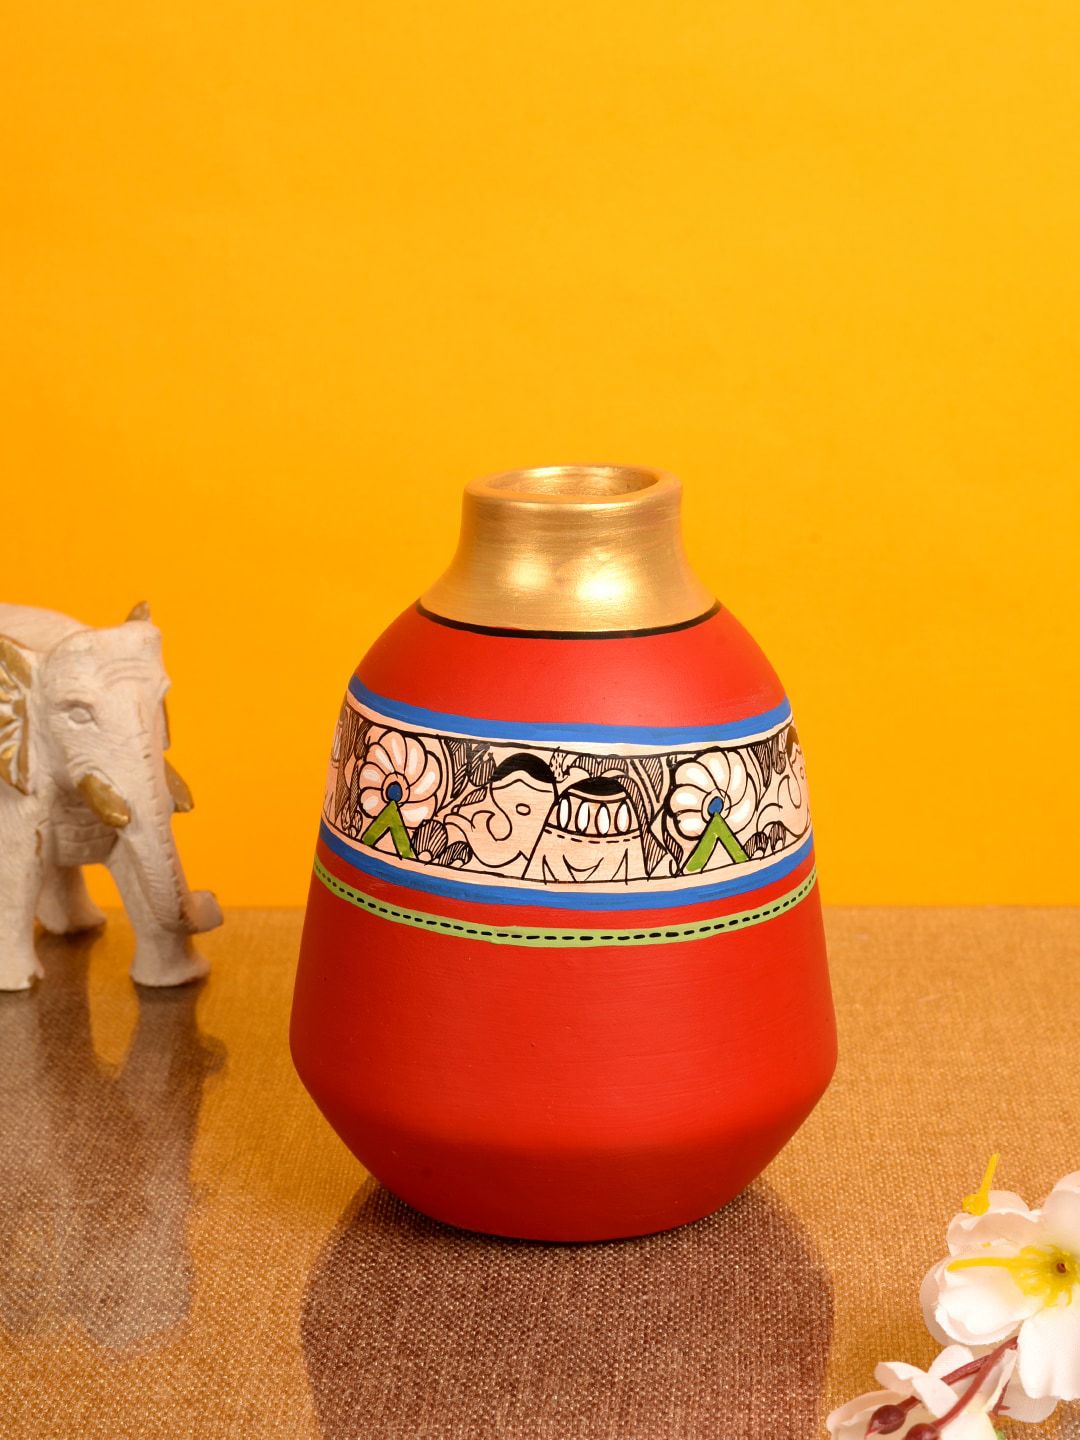 AAKRITI ART CREATIONS Red & Blue Handcrafted Madhubani Vase Price in India